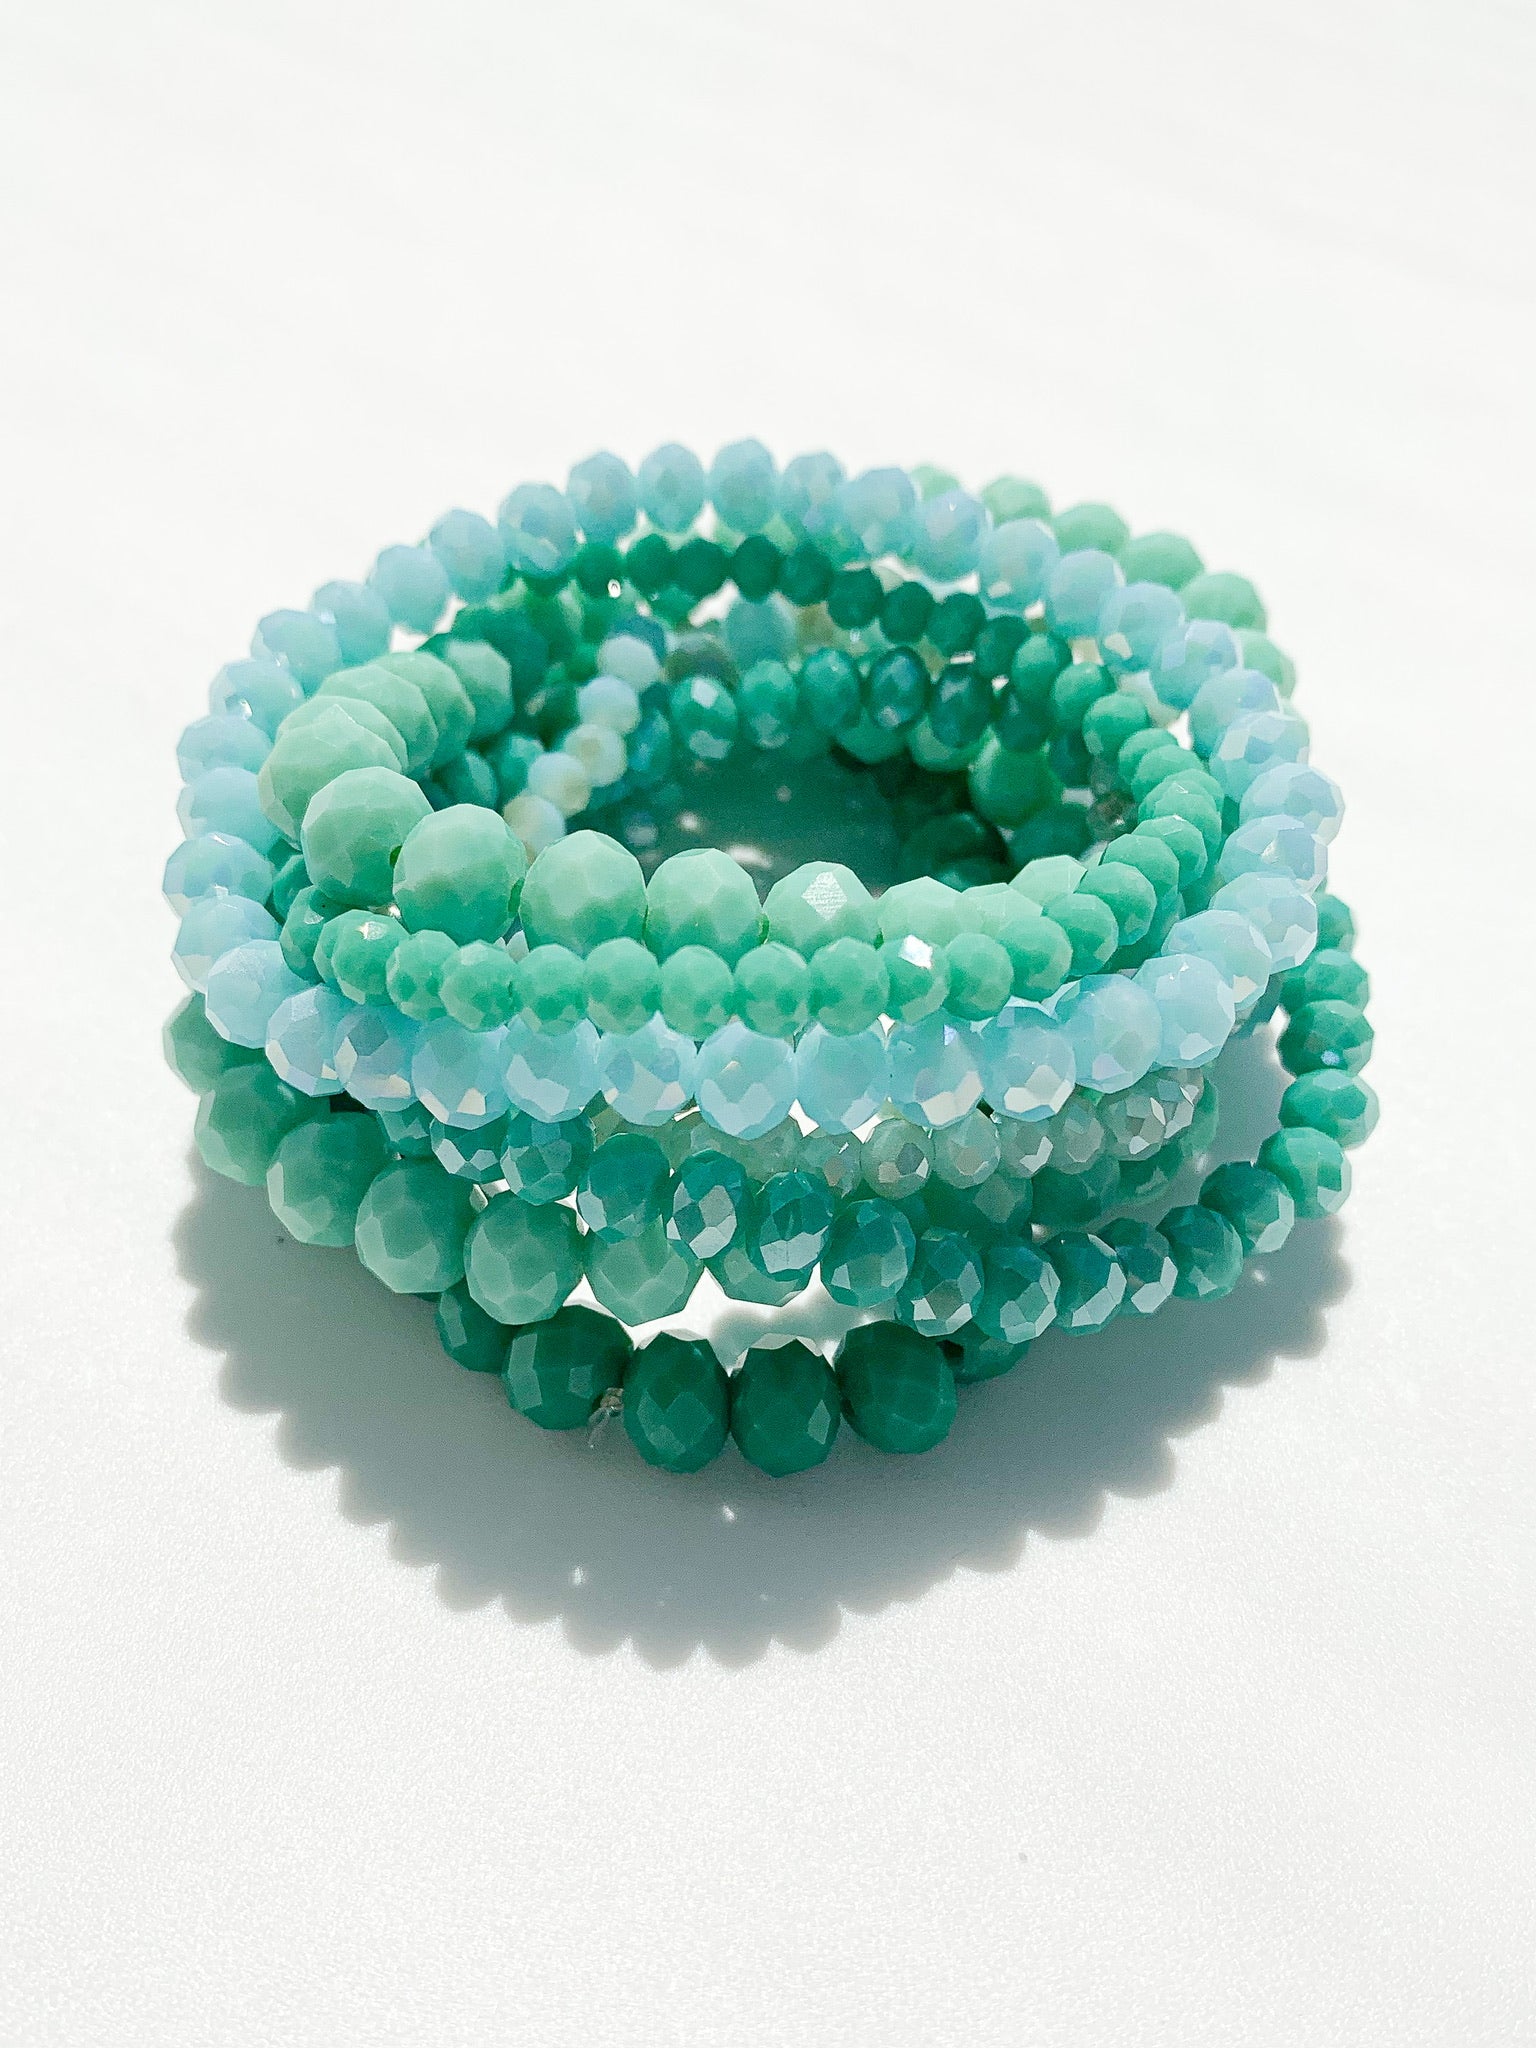 Charity Sea Green/Blue Bracelet. Stretchy, stackable